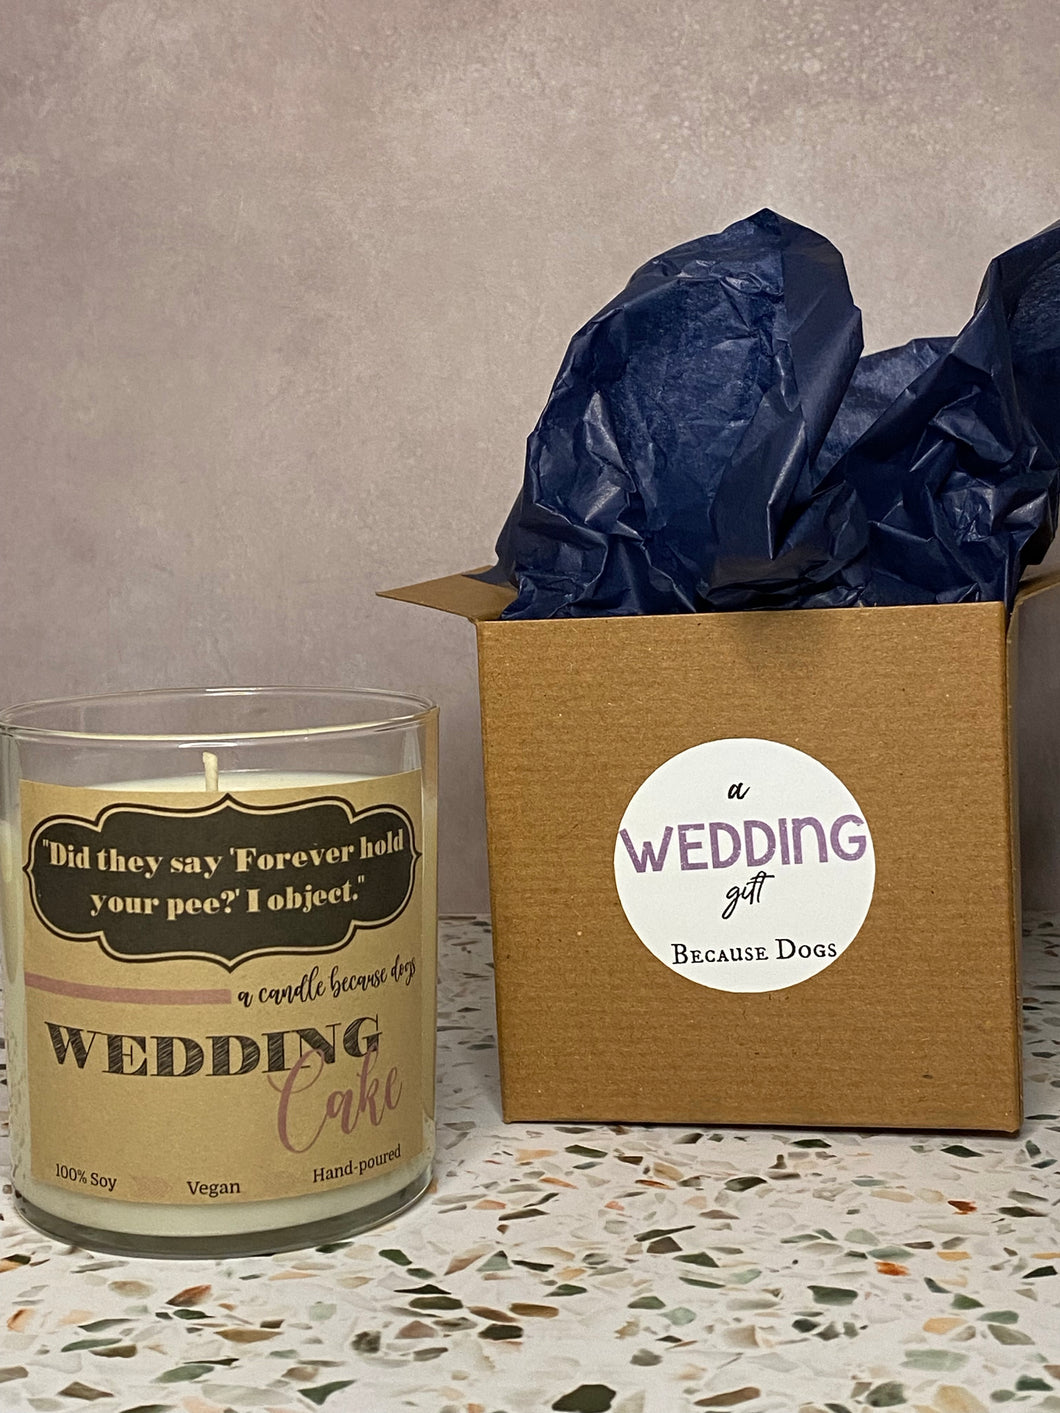 A Wedding Gift Because Dogs -- “Did they say ‘Forever hold your pee?’ I object.”